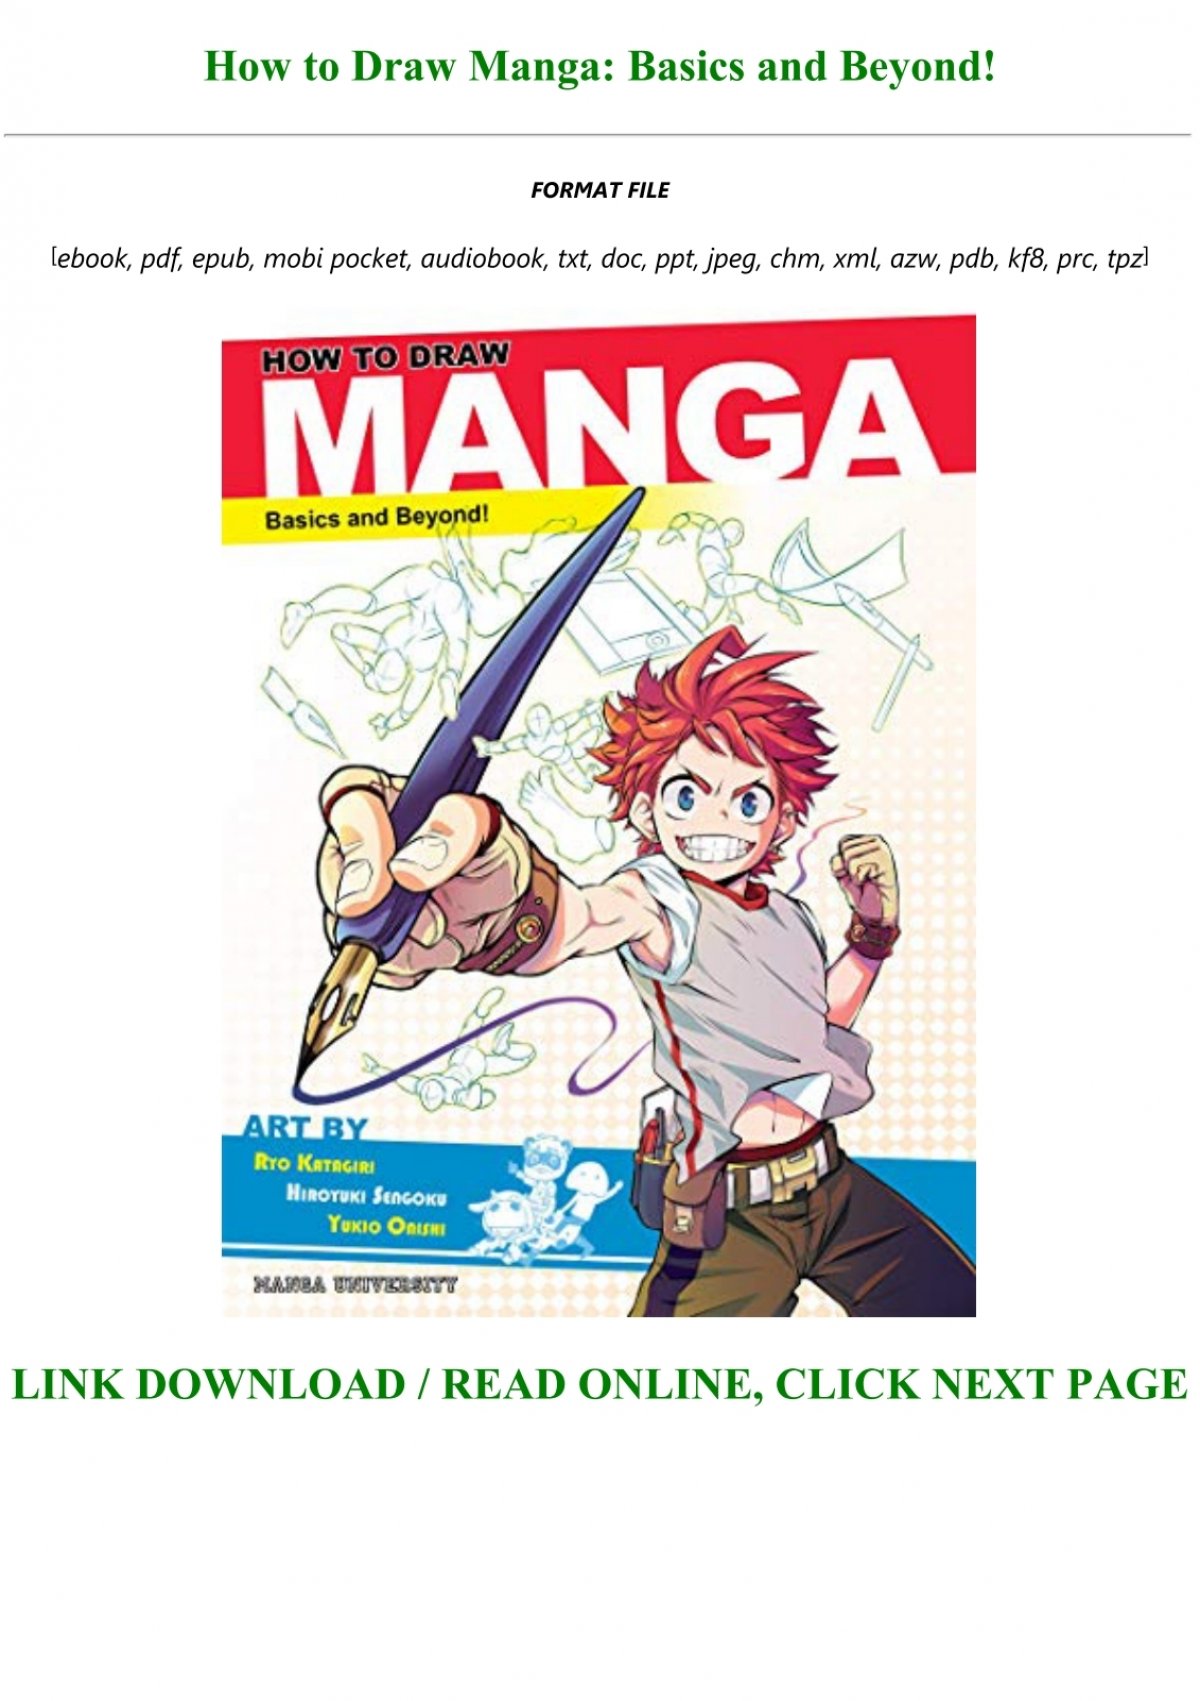 [DOWNLOAD $PDF$] How to Draw Manga: Basics and Beyond! Pre Order